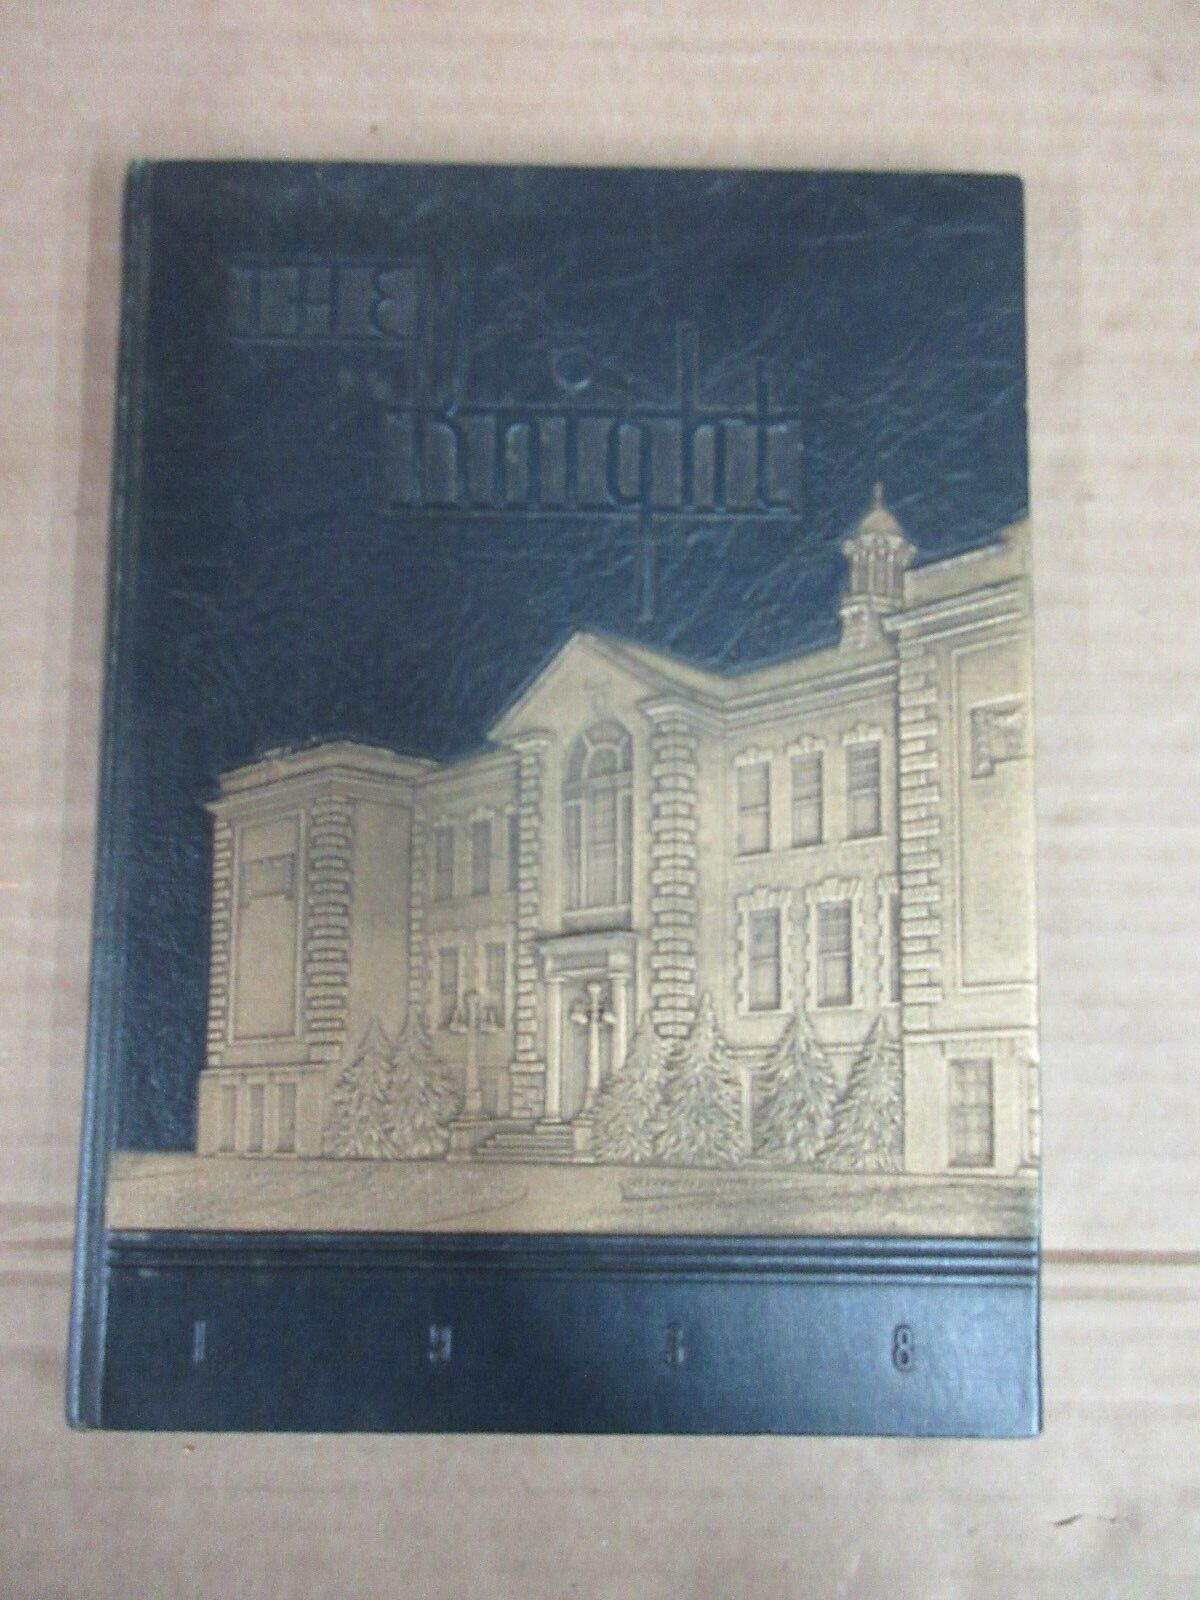 Vintage The Knight 1938 Yearbook Collingswood High School Collingswood NJ